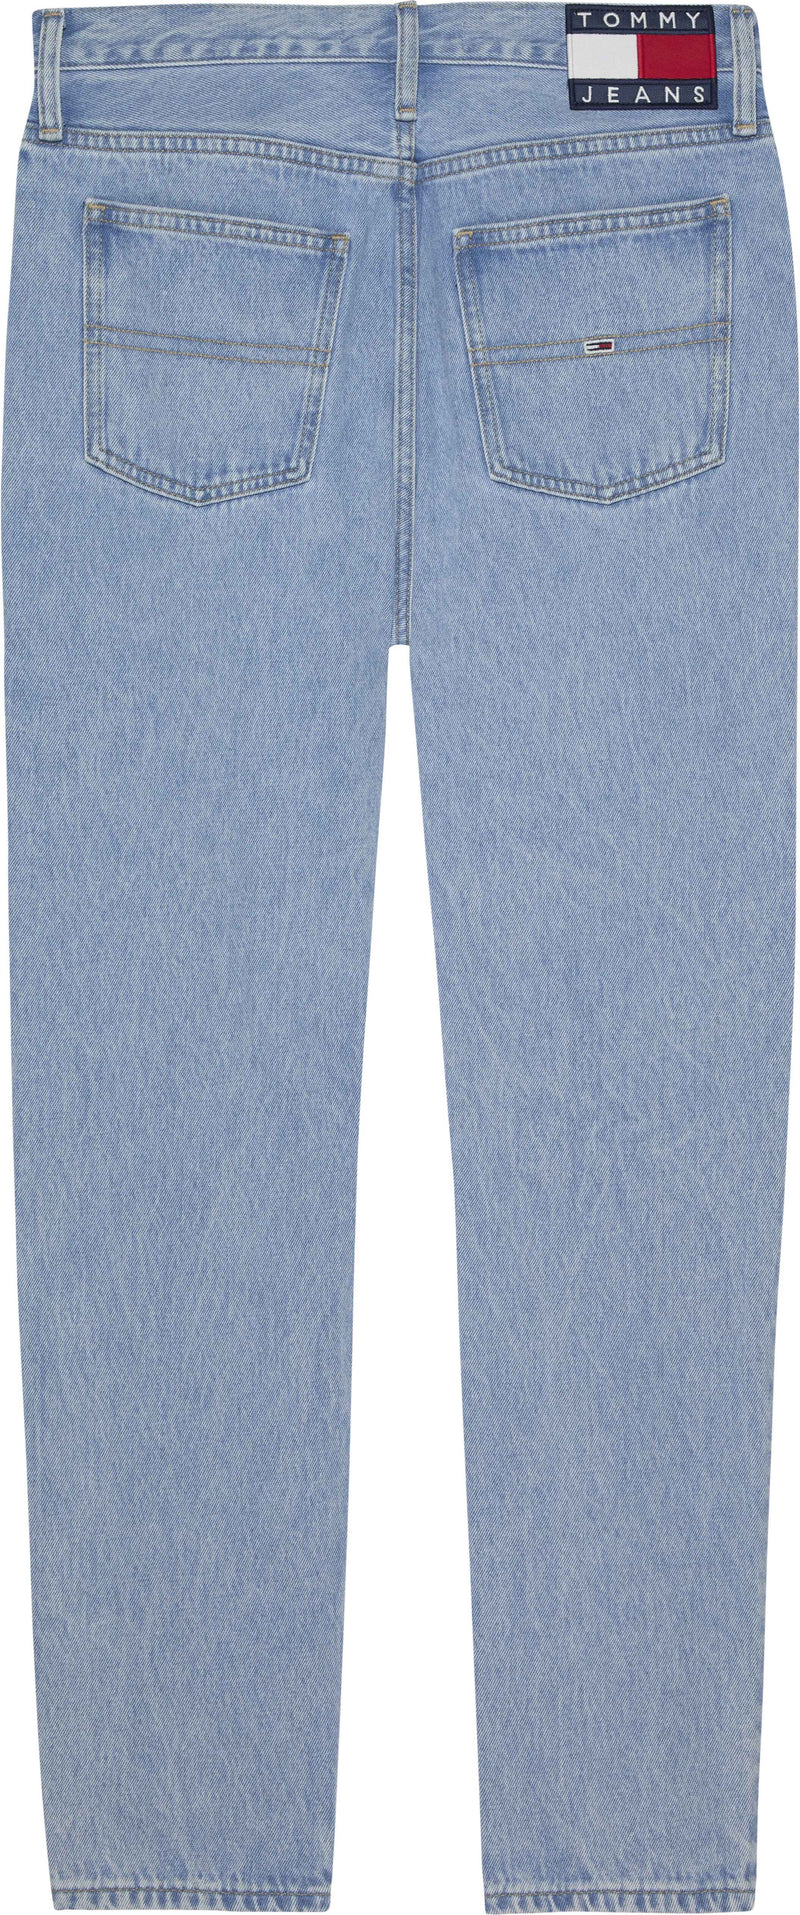 TOMMY JEANS IZZIE HR SLIM ANKLE JEANS 1AB